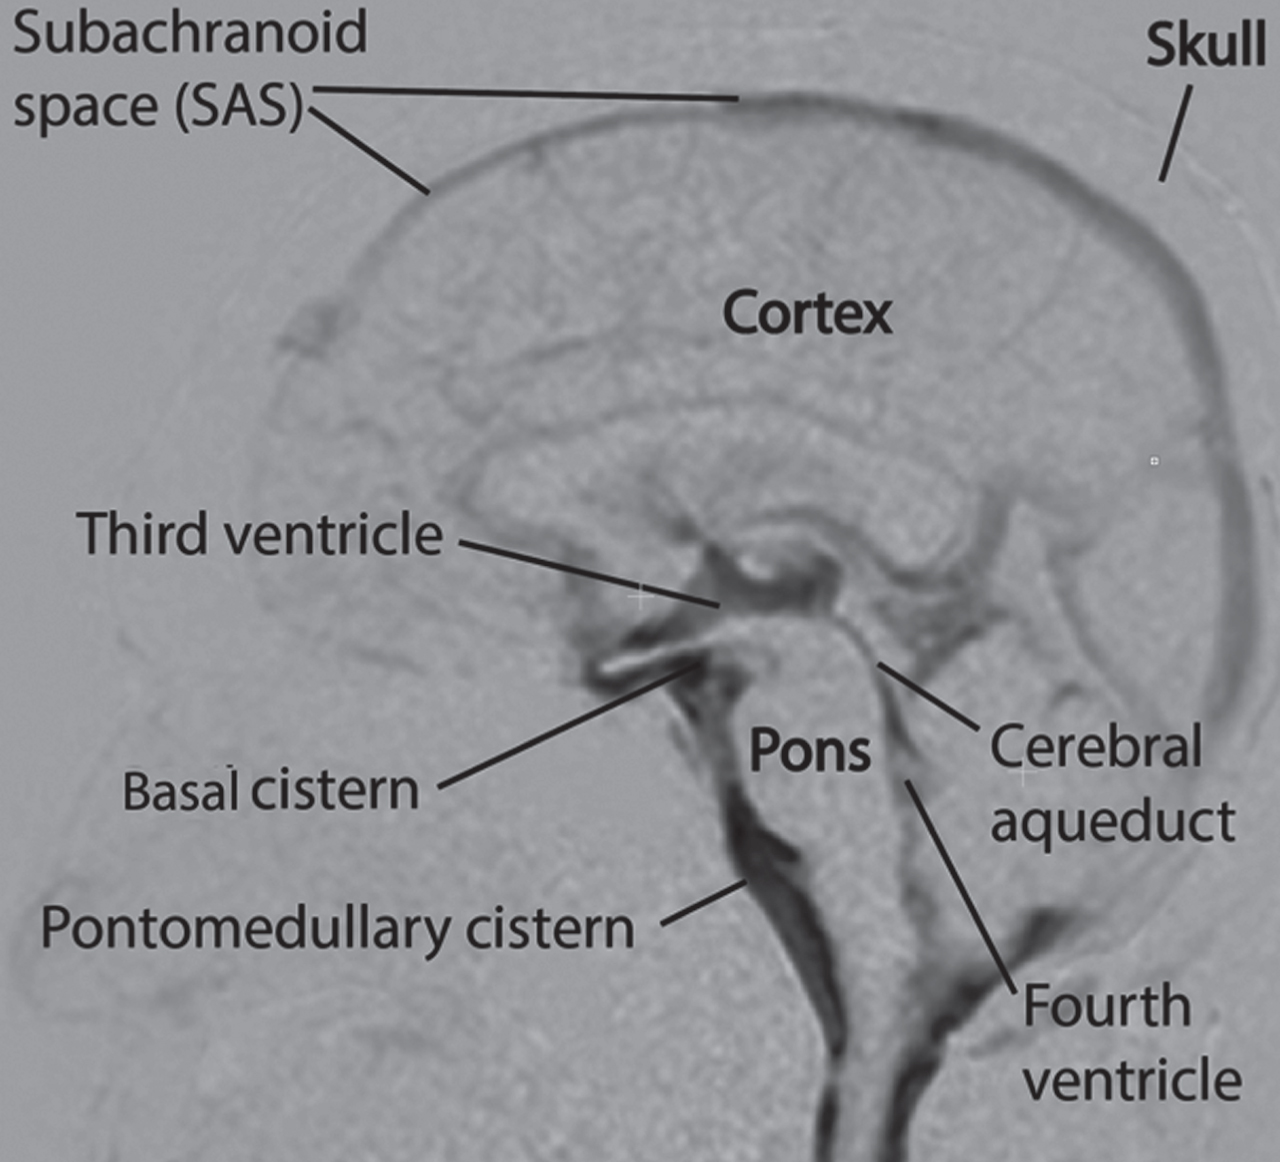 Zones of chaotic/“turbulent” CSF motion in black (most intense) and shades of gray (less intense). These zones are found mainly around the brainstem, cisterns, third ventricle, spinal cord, and to a lesser extent, cortex SAS. This MRI study was on a healthy human subject. Source: [18] licensed under Creative Commons Attribution-Non Commercial-No Derivative International. Alteration permission granted by authors.